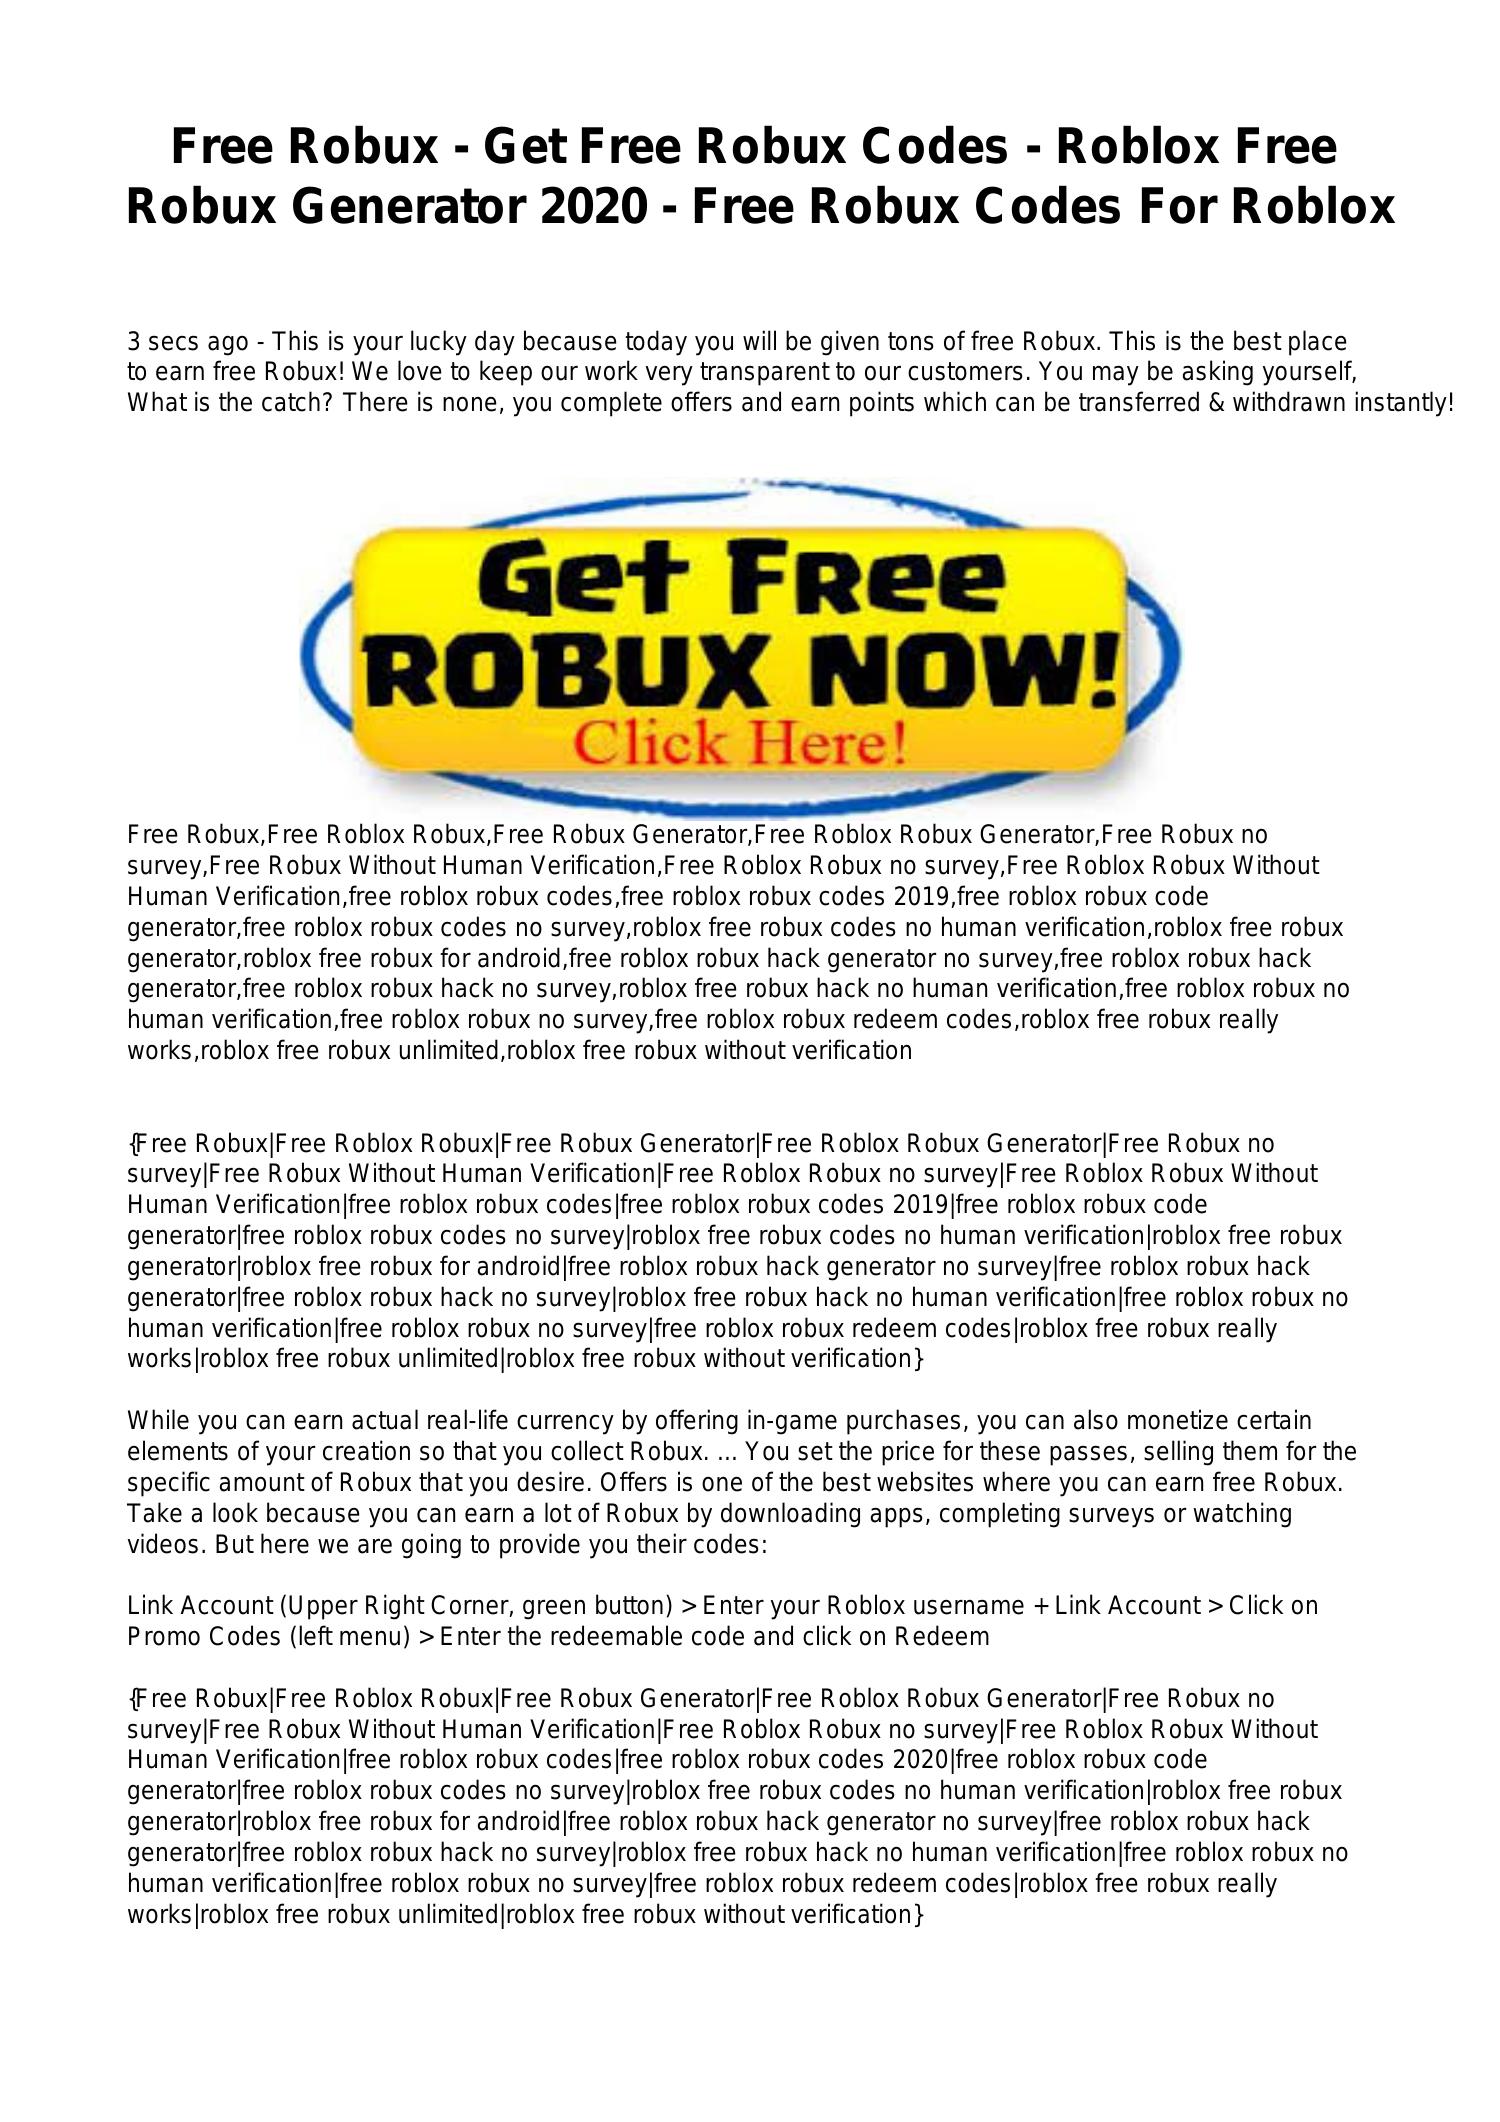 Free Robux Get Free Robux Codes Roblox Free Robux Generator 2020 Free Robux Codes For Roblox Pdf Docdroid - robux net in redeem